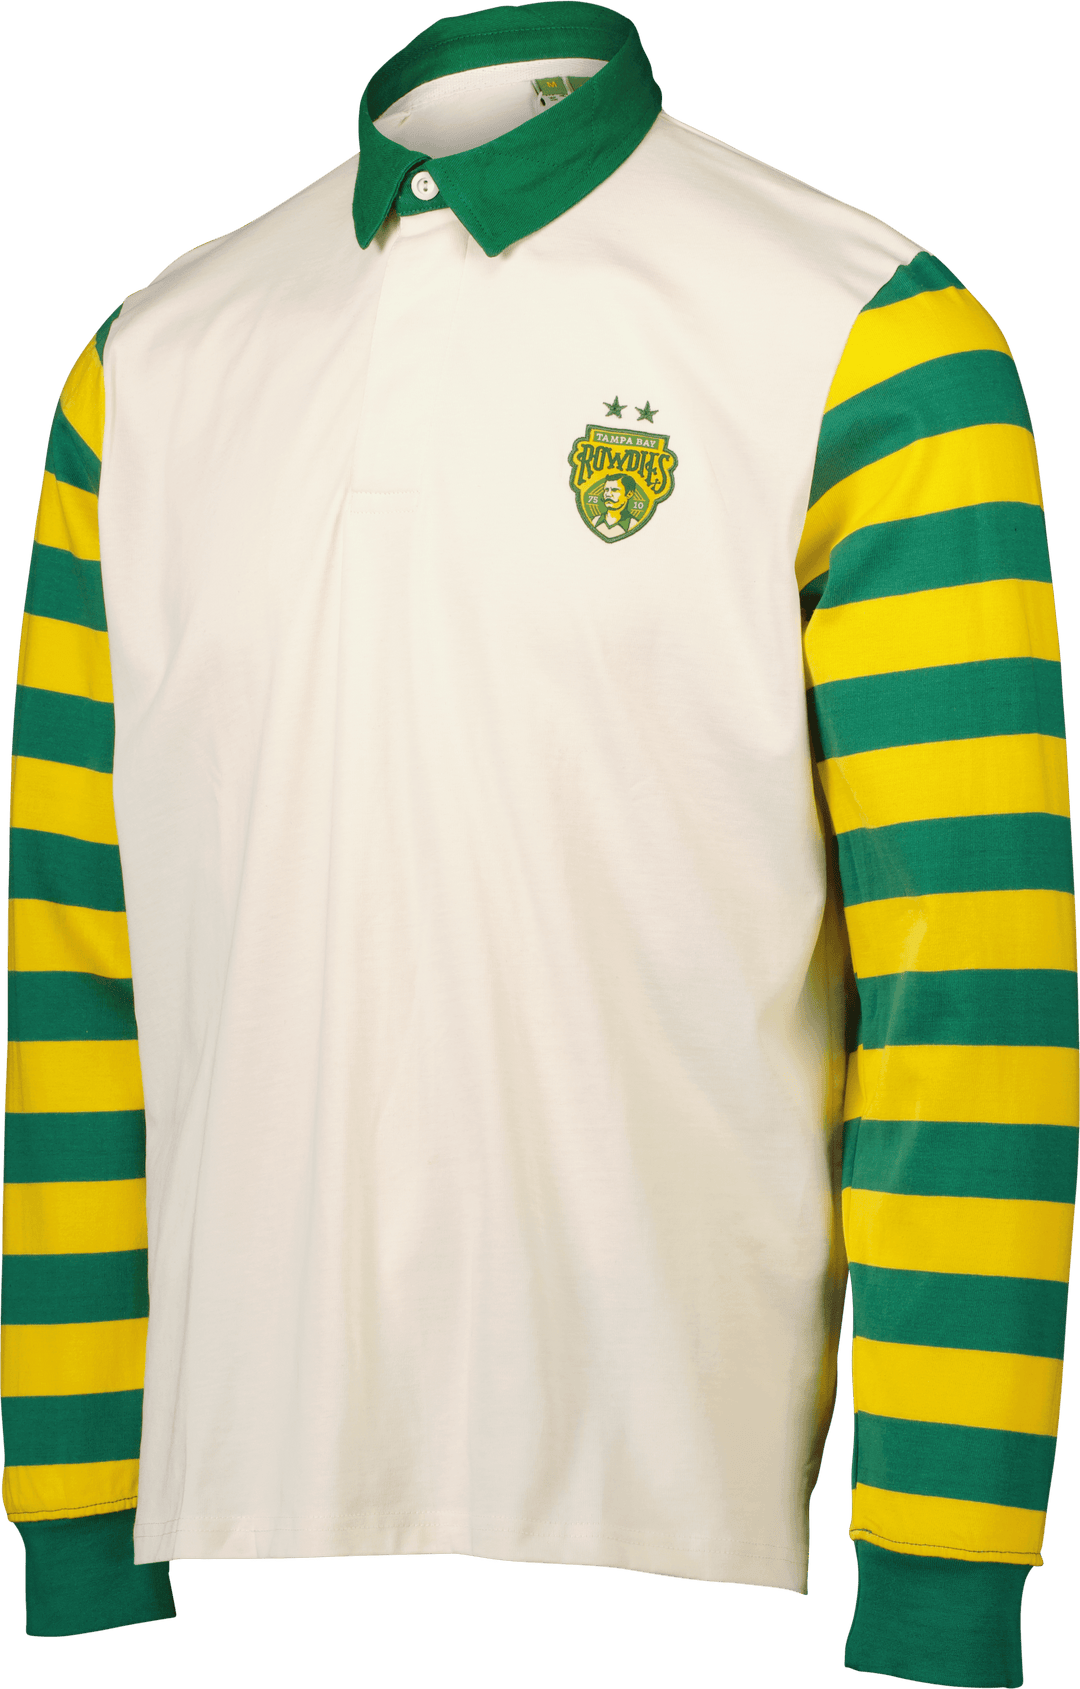 ROWDIES MEN'S WHITE CREST STRIPED SPORT DESIGN SWEDEN LONG SLEEVE POLO - The Bay Republic | Team Store of the Tampa Bay Rays & Rowdies